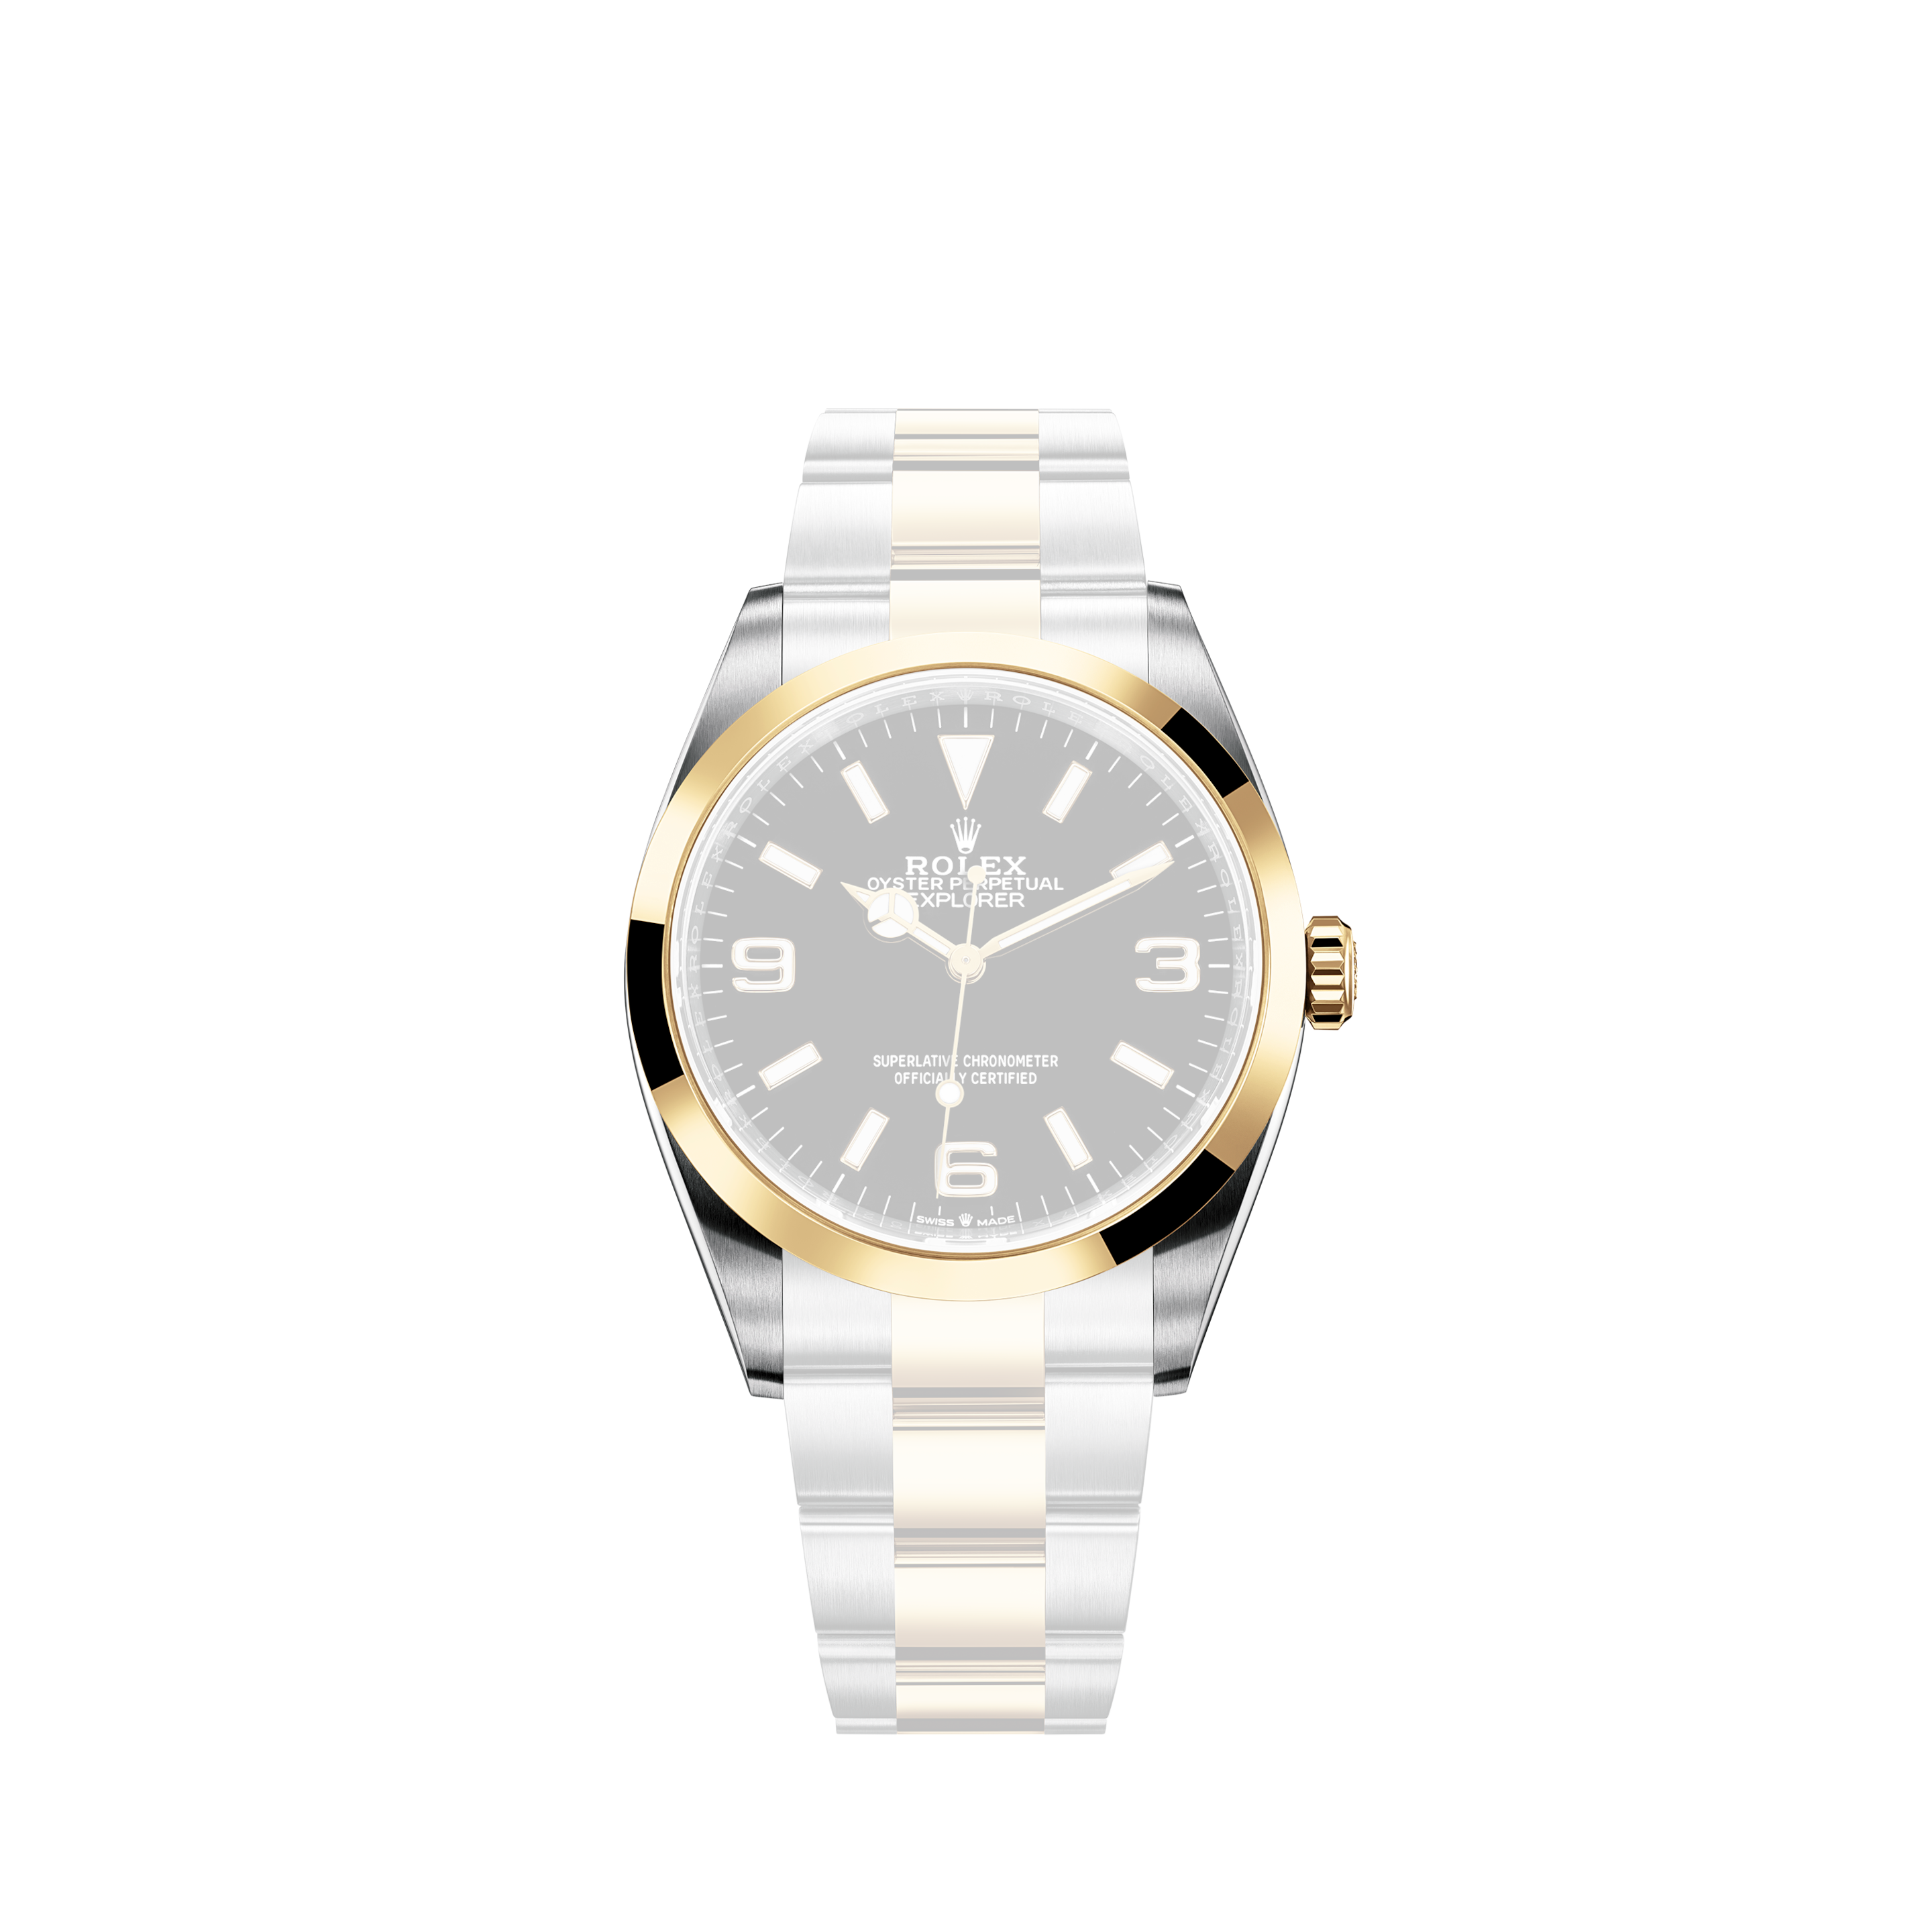 Rolex Datejust II Stainless Steel and Gold Black Roman Dial Watch 116333Rolex Datejust II Stainless Steel and Gold Champagne Factory Diamond Dial Watch 116333